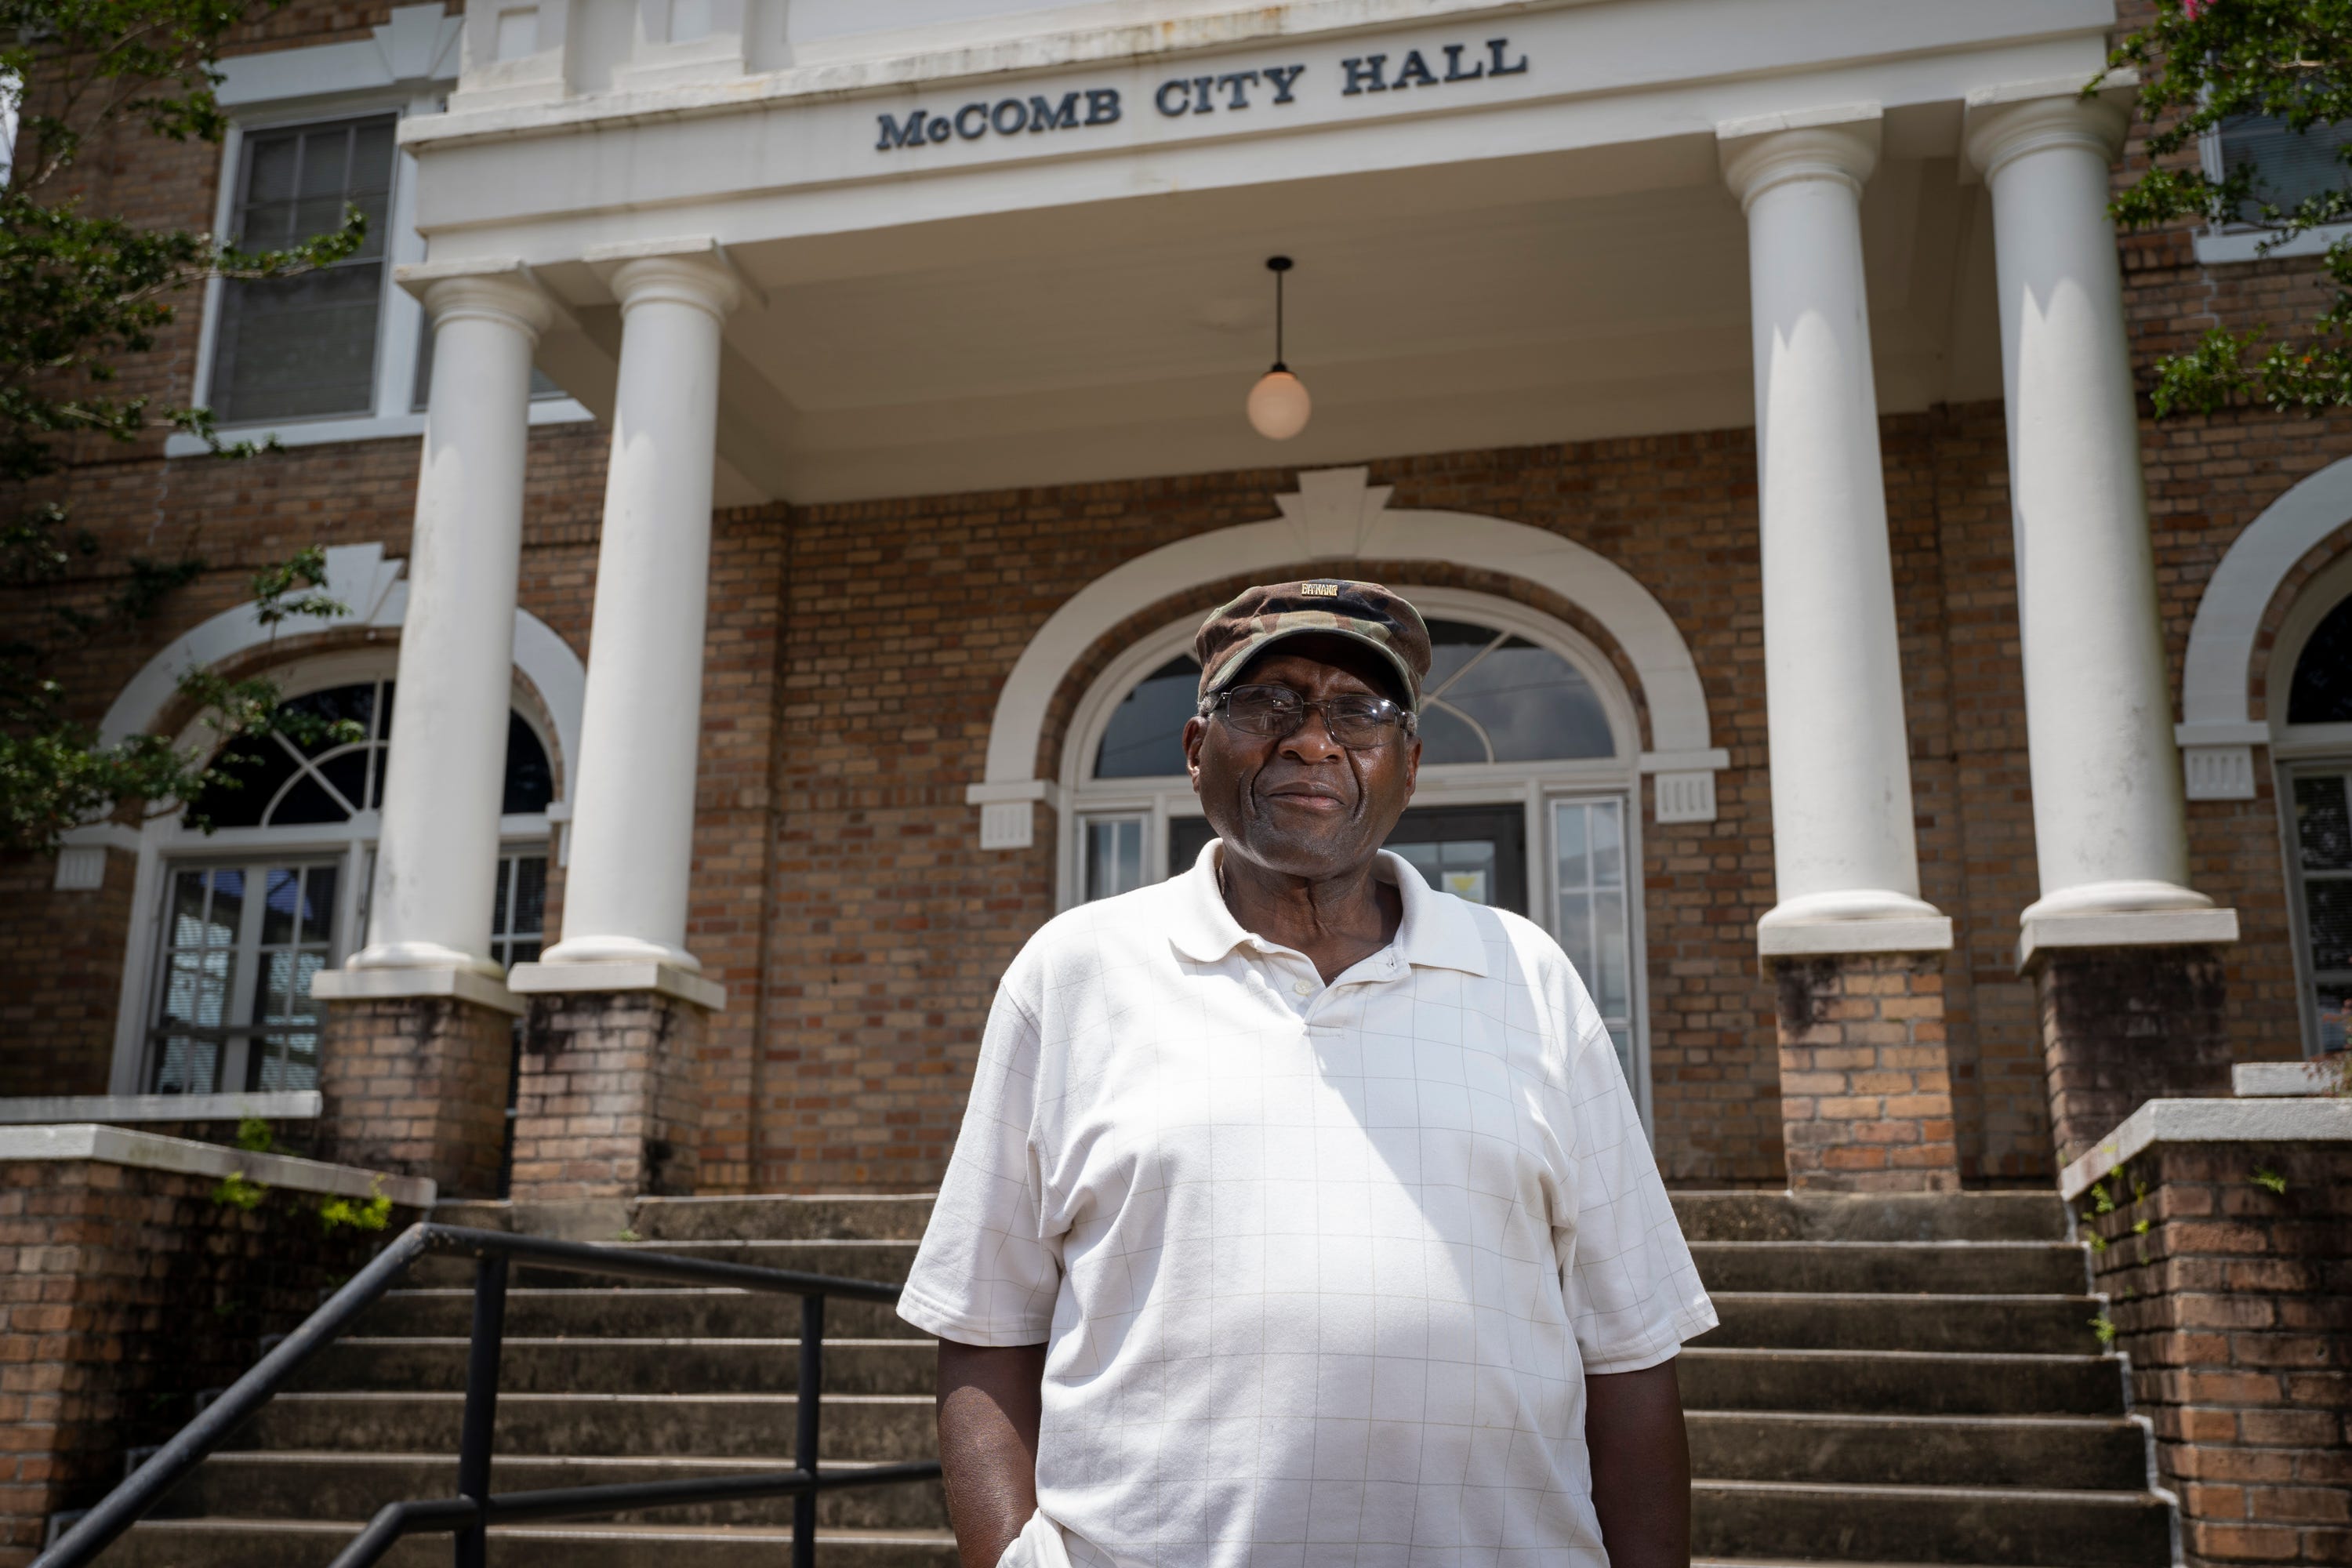 Robert "Bobby" Talbert, who was arrested along with Brenda Travis and Ike Lewis for sitting in the white-only section of the Greyhound bus station, stands outside the McComb City Hall in McComb, Miss., where they were initially held in a jail downstairs.